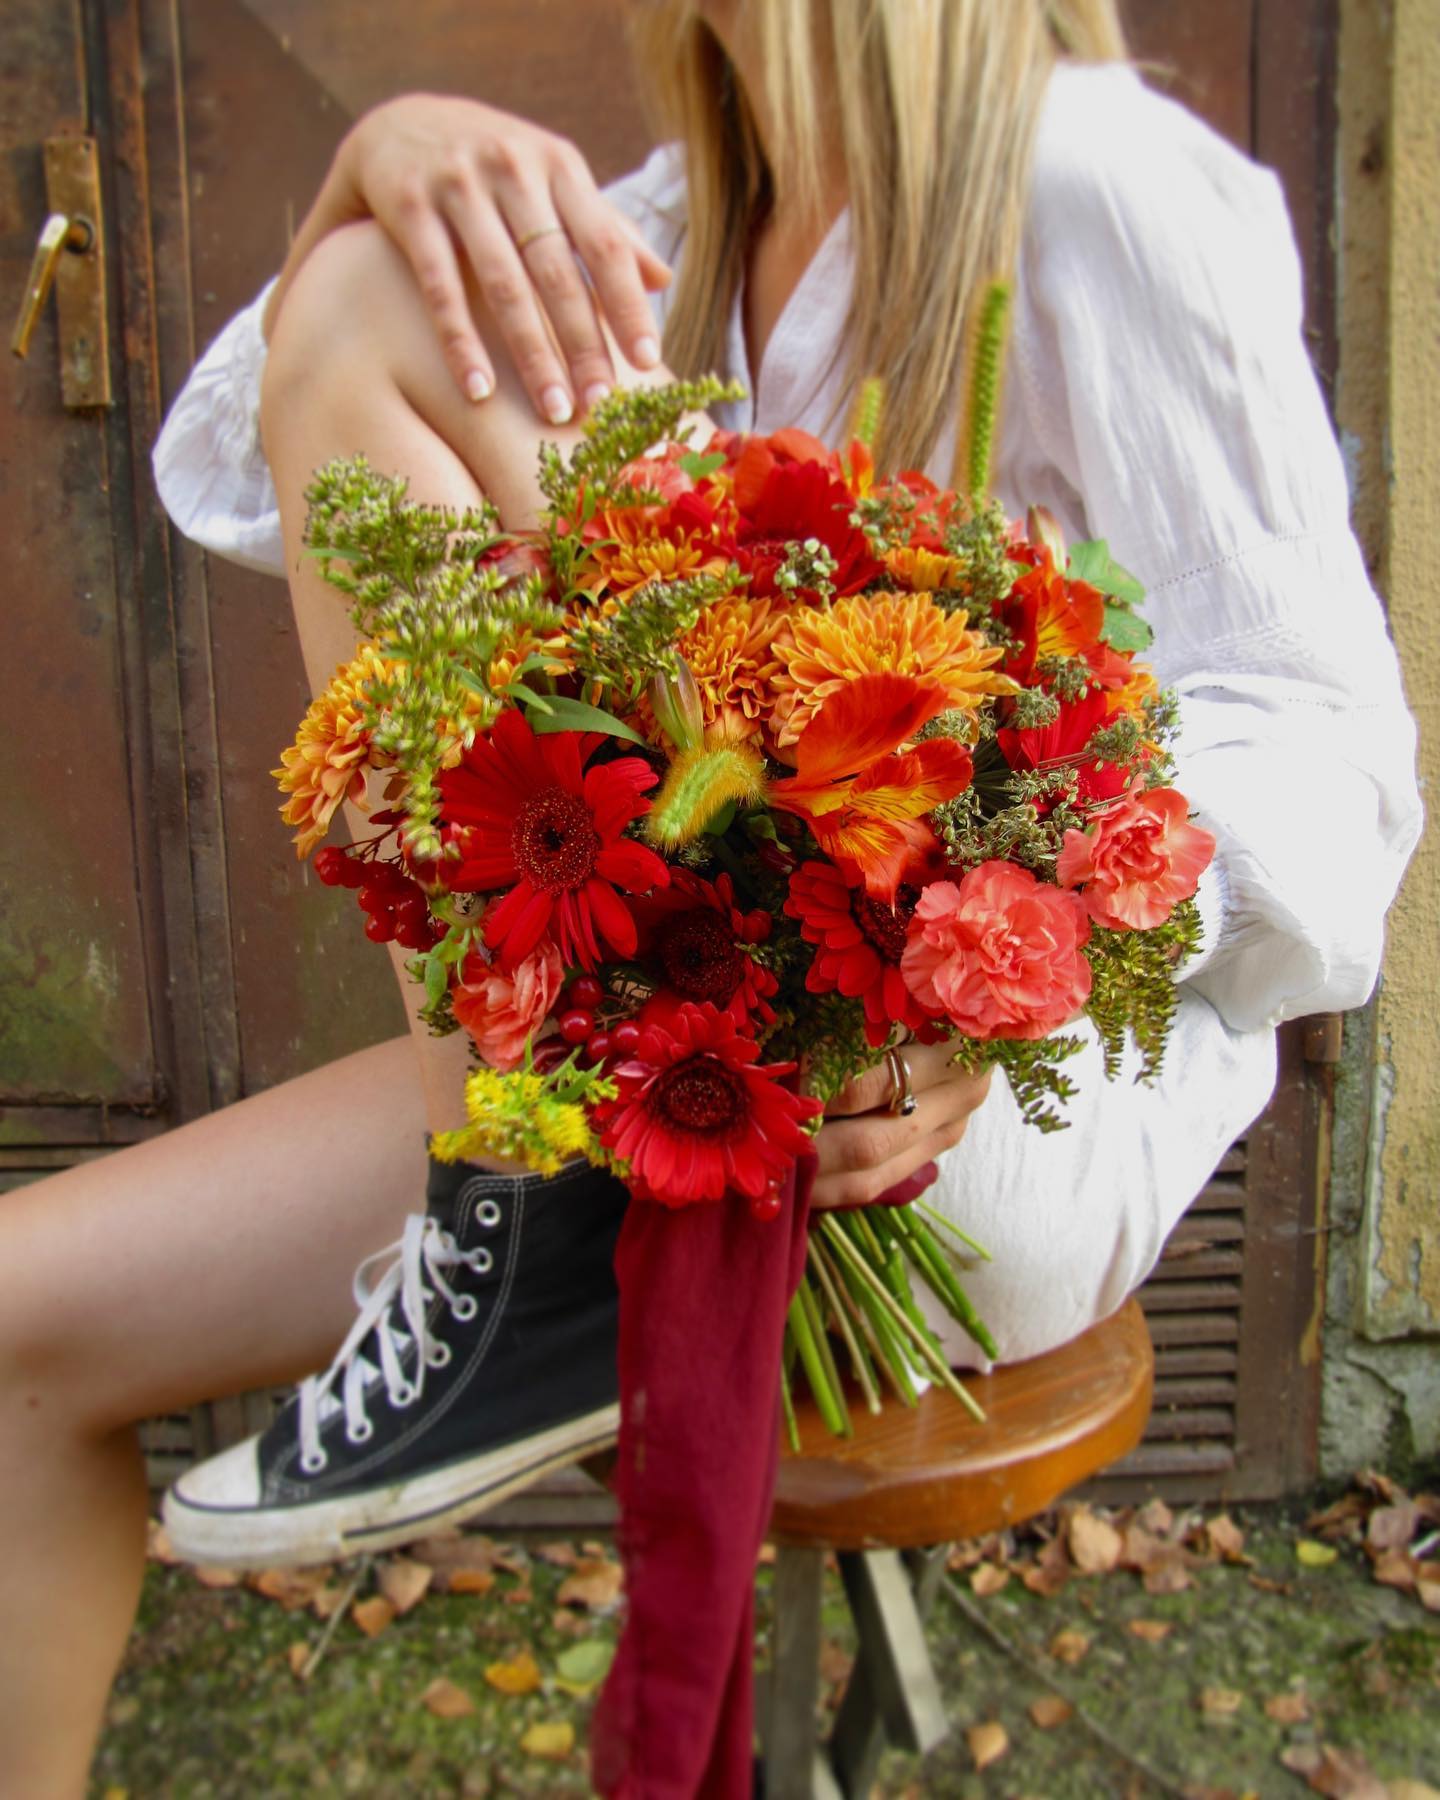 How to choose the best flowers for a date - red bouquet